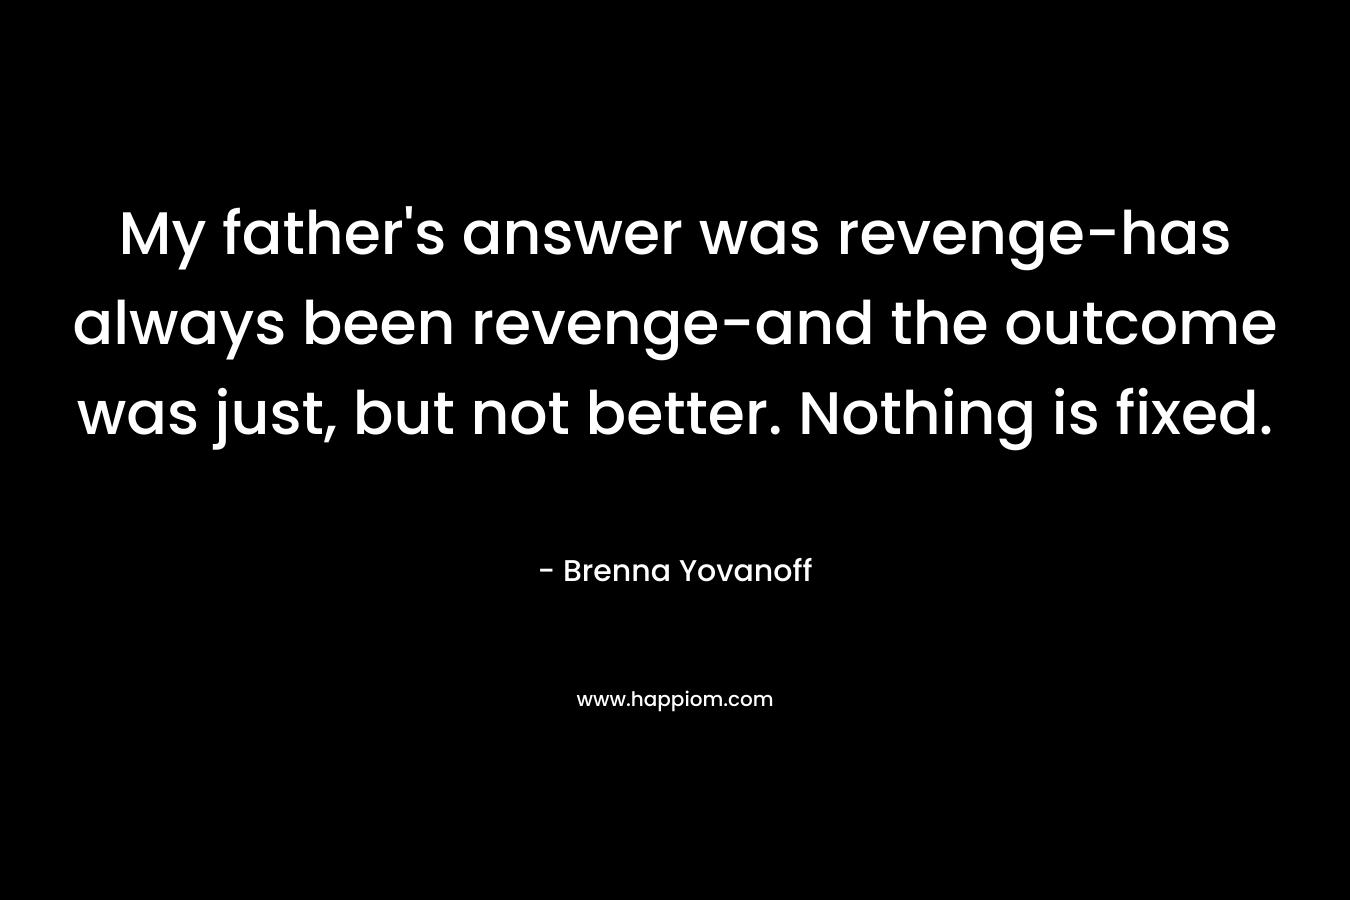 My father’s answer was revenge-has always been revenge-and the outcome was just, but not better. Nothing is fixed. – Brenna Yovanoff